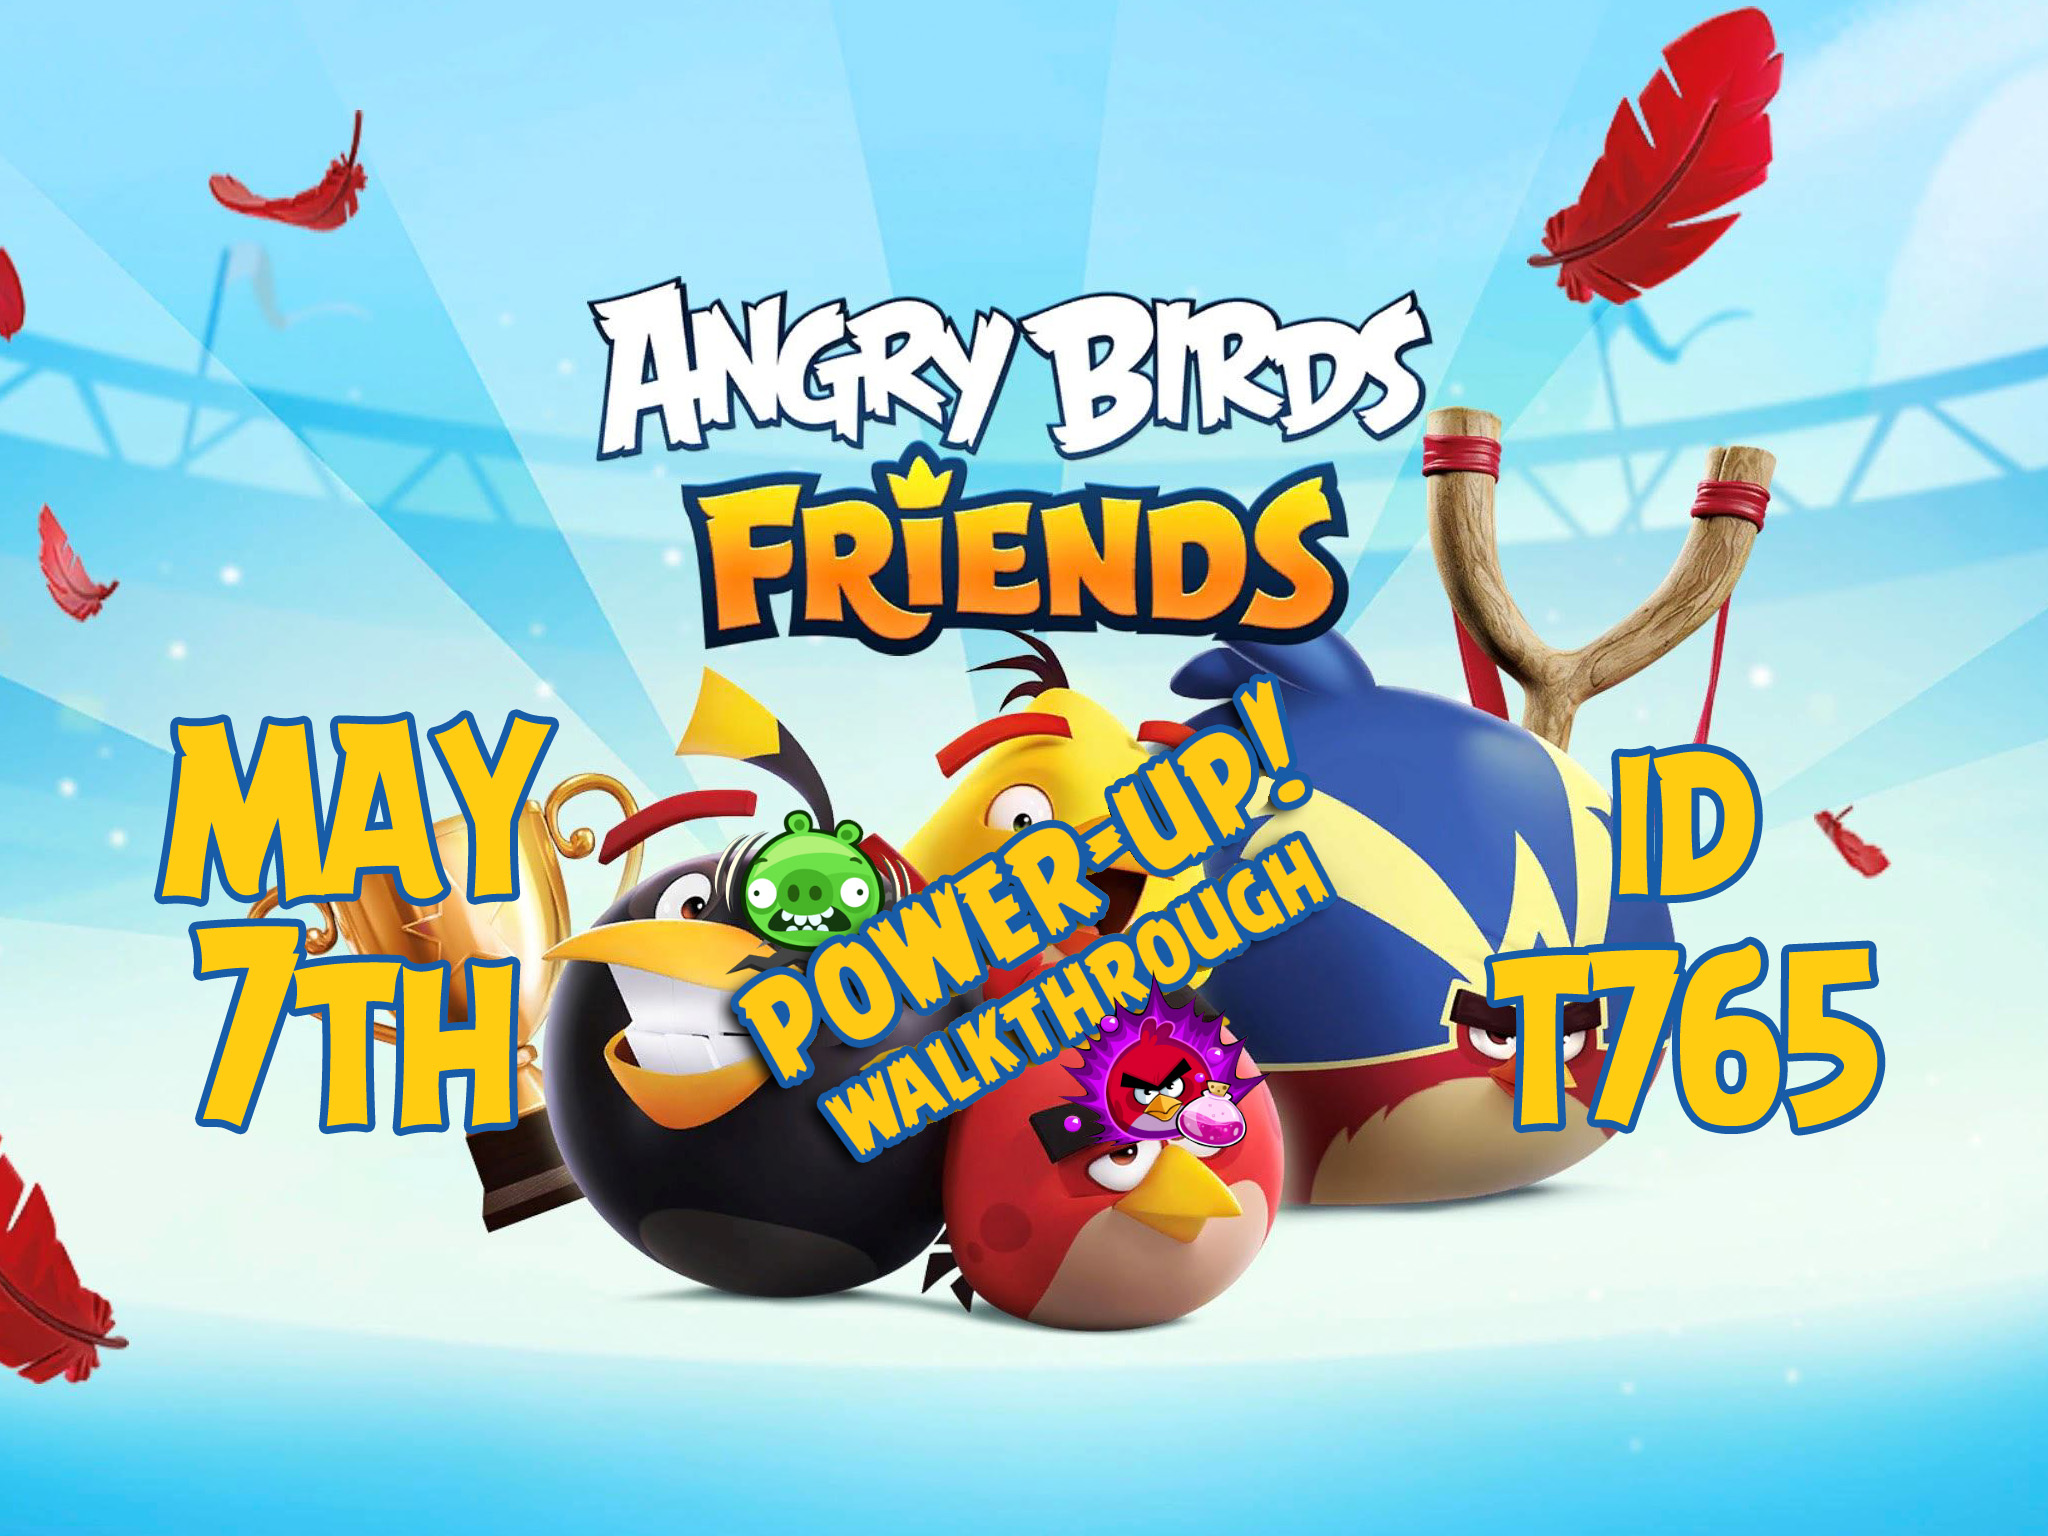 Angry-Birds-Friends-Tournament-T765-Feature-Image-PU